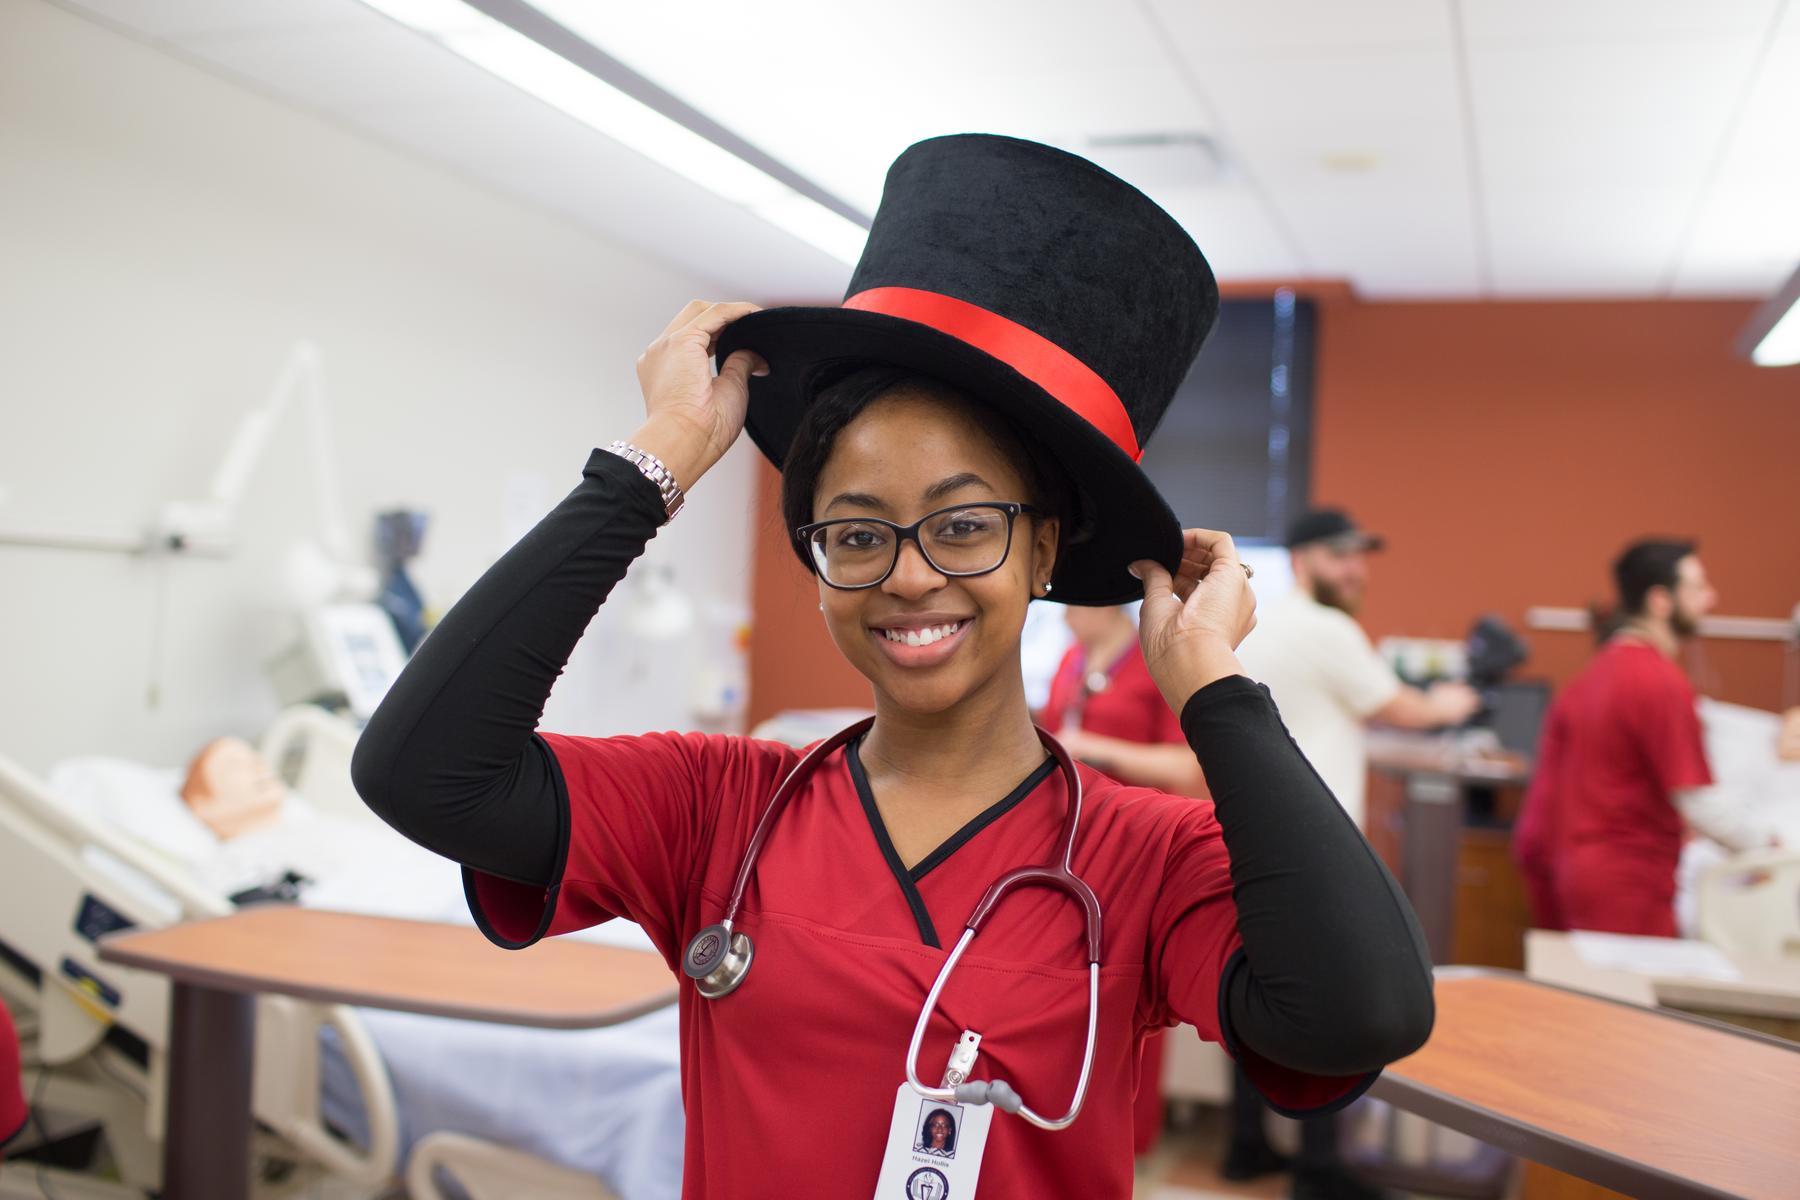 Austin Peay launches inaugural ‘Do You Want to Be a Nurse?’ Summer Camp